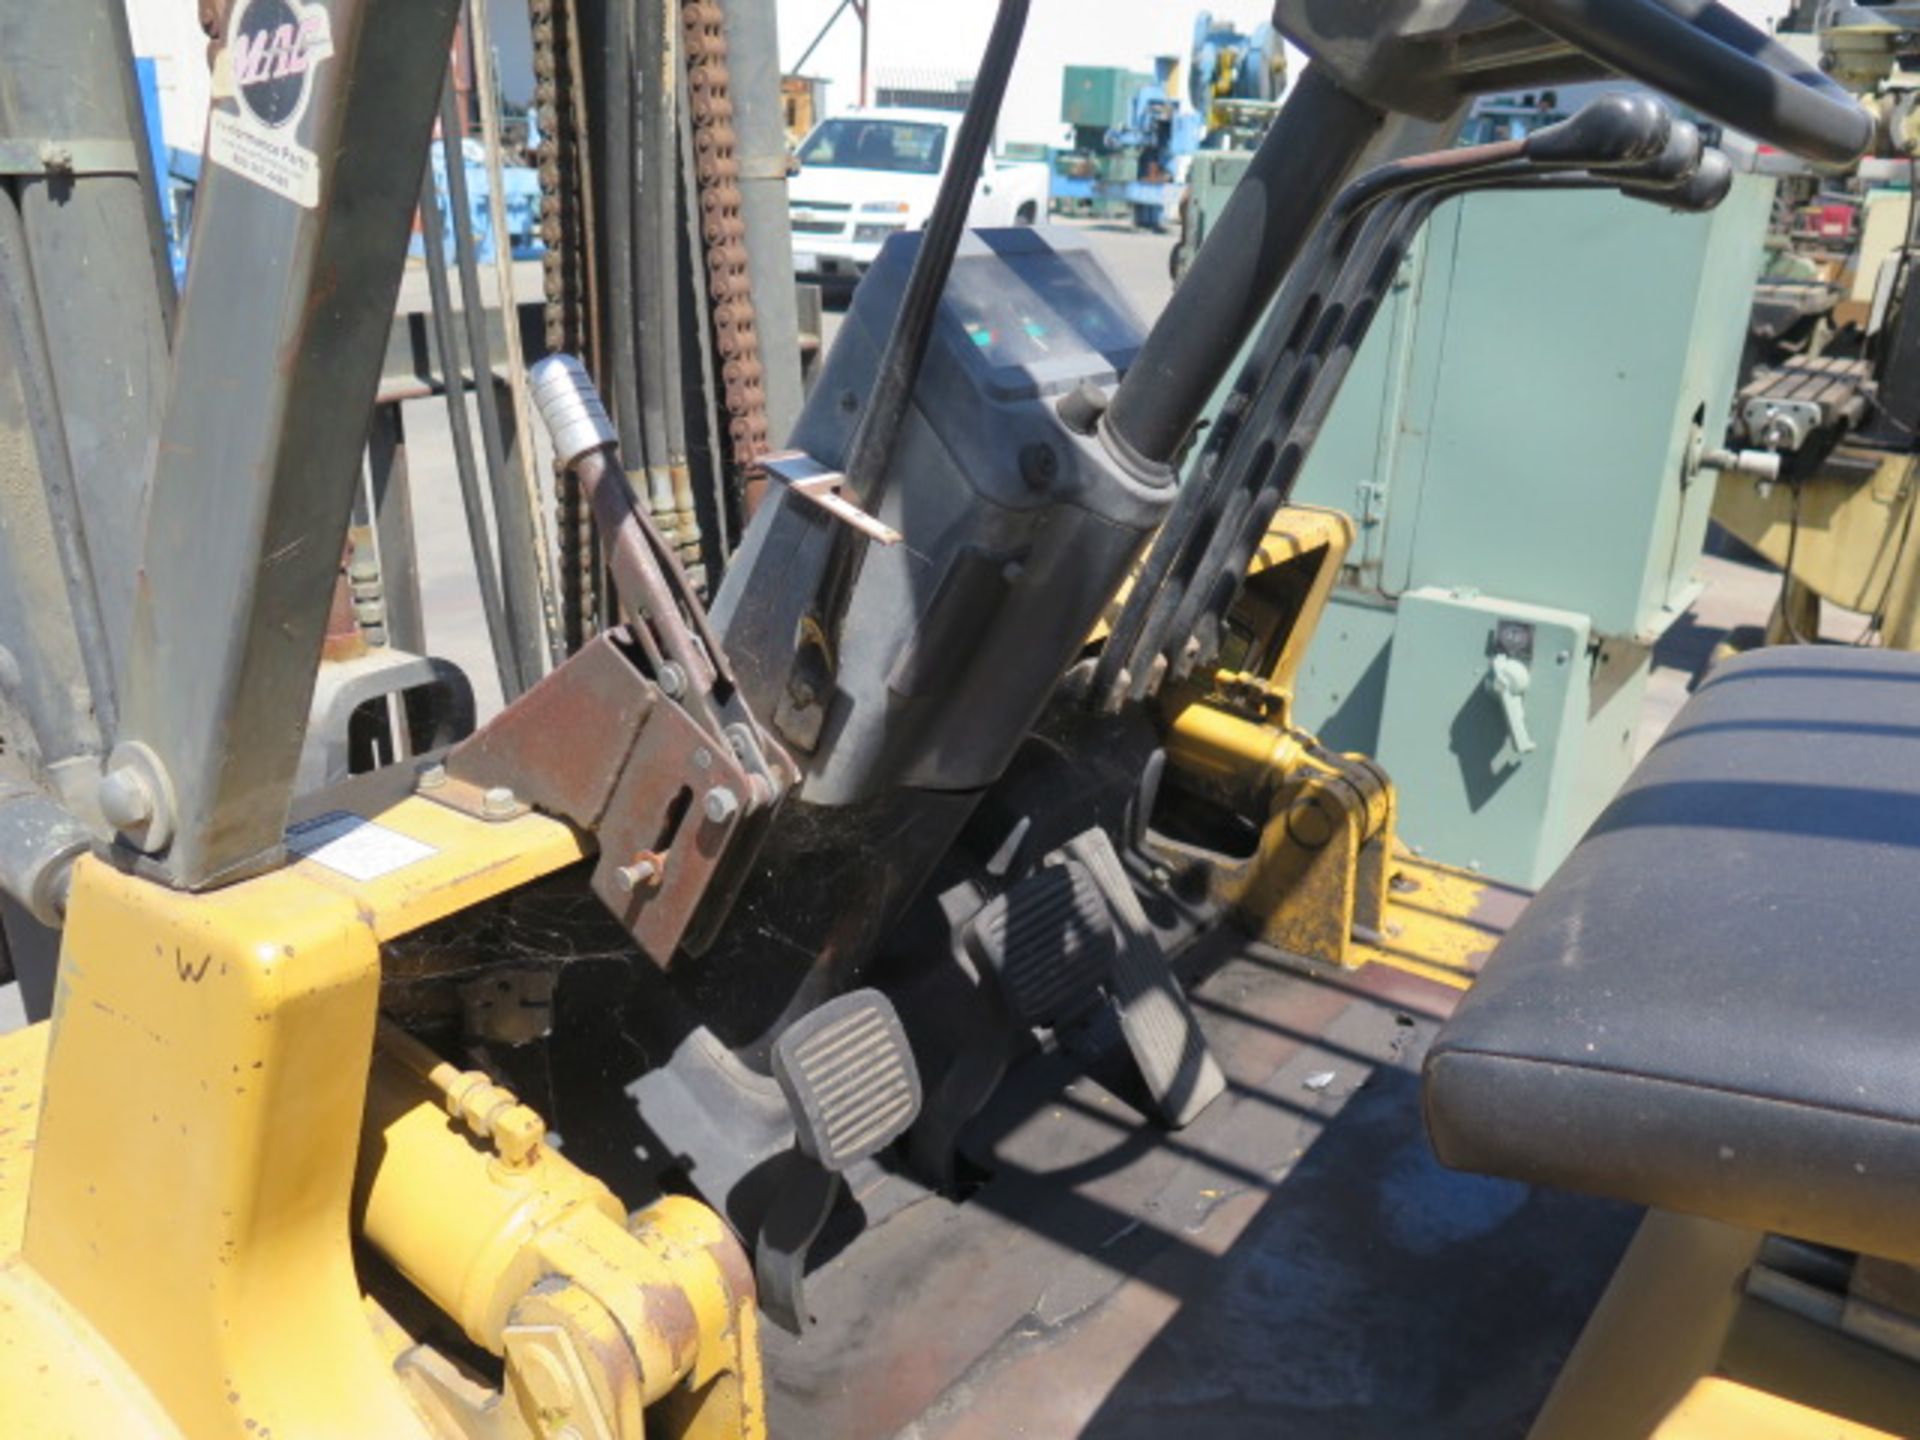 Caterpillar 80 8000 Lb Cap LPG Forklift w/ 2-Stage Mast, Side Shift, Pneumatic Yard Tires - Image 8 of 9